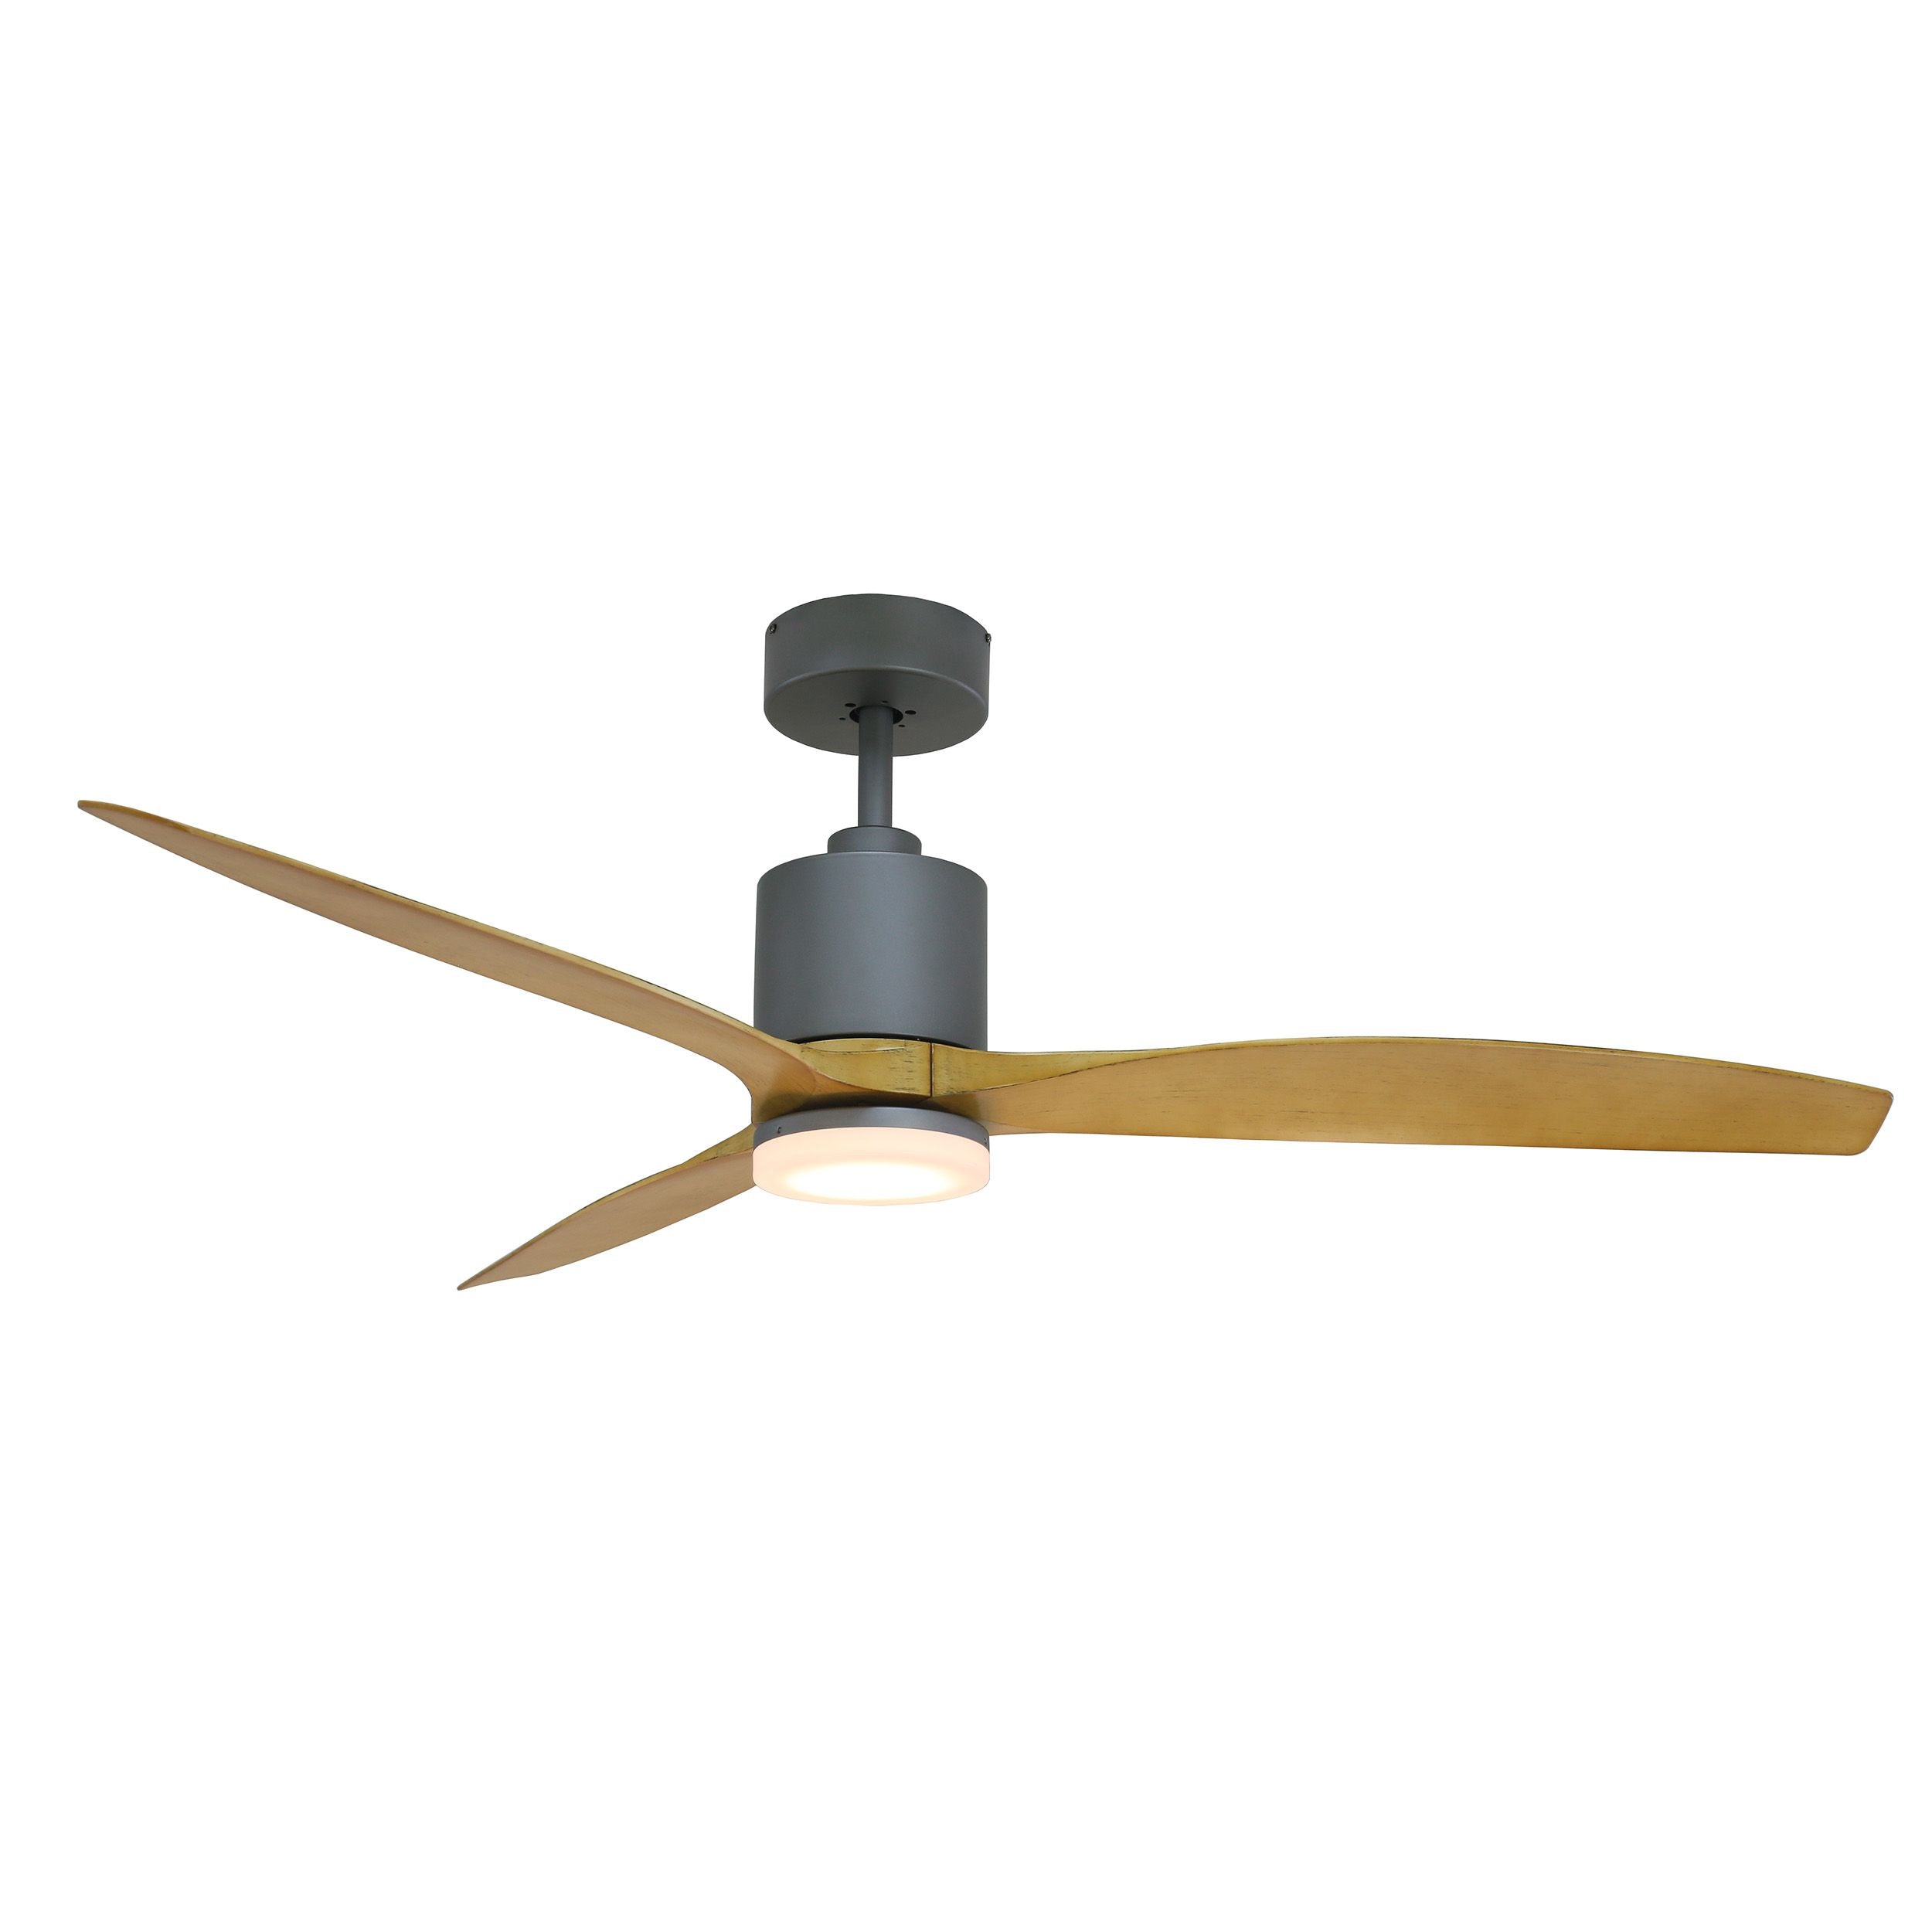 Maison Elite Tripolo 60 In. Voice Activated Smart Ceiling Fan in